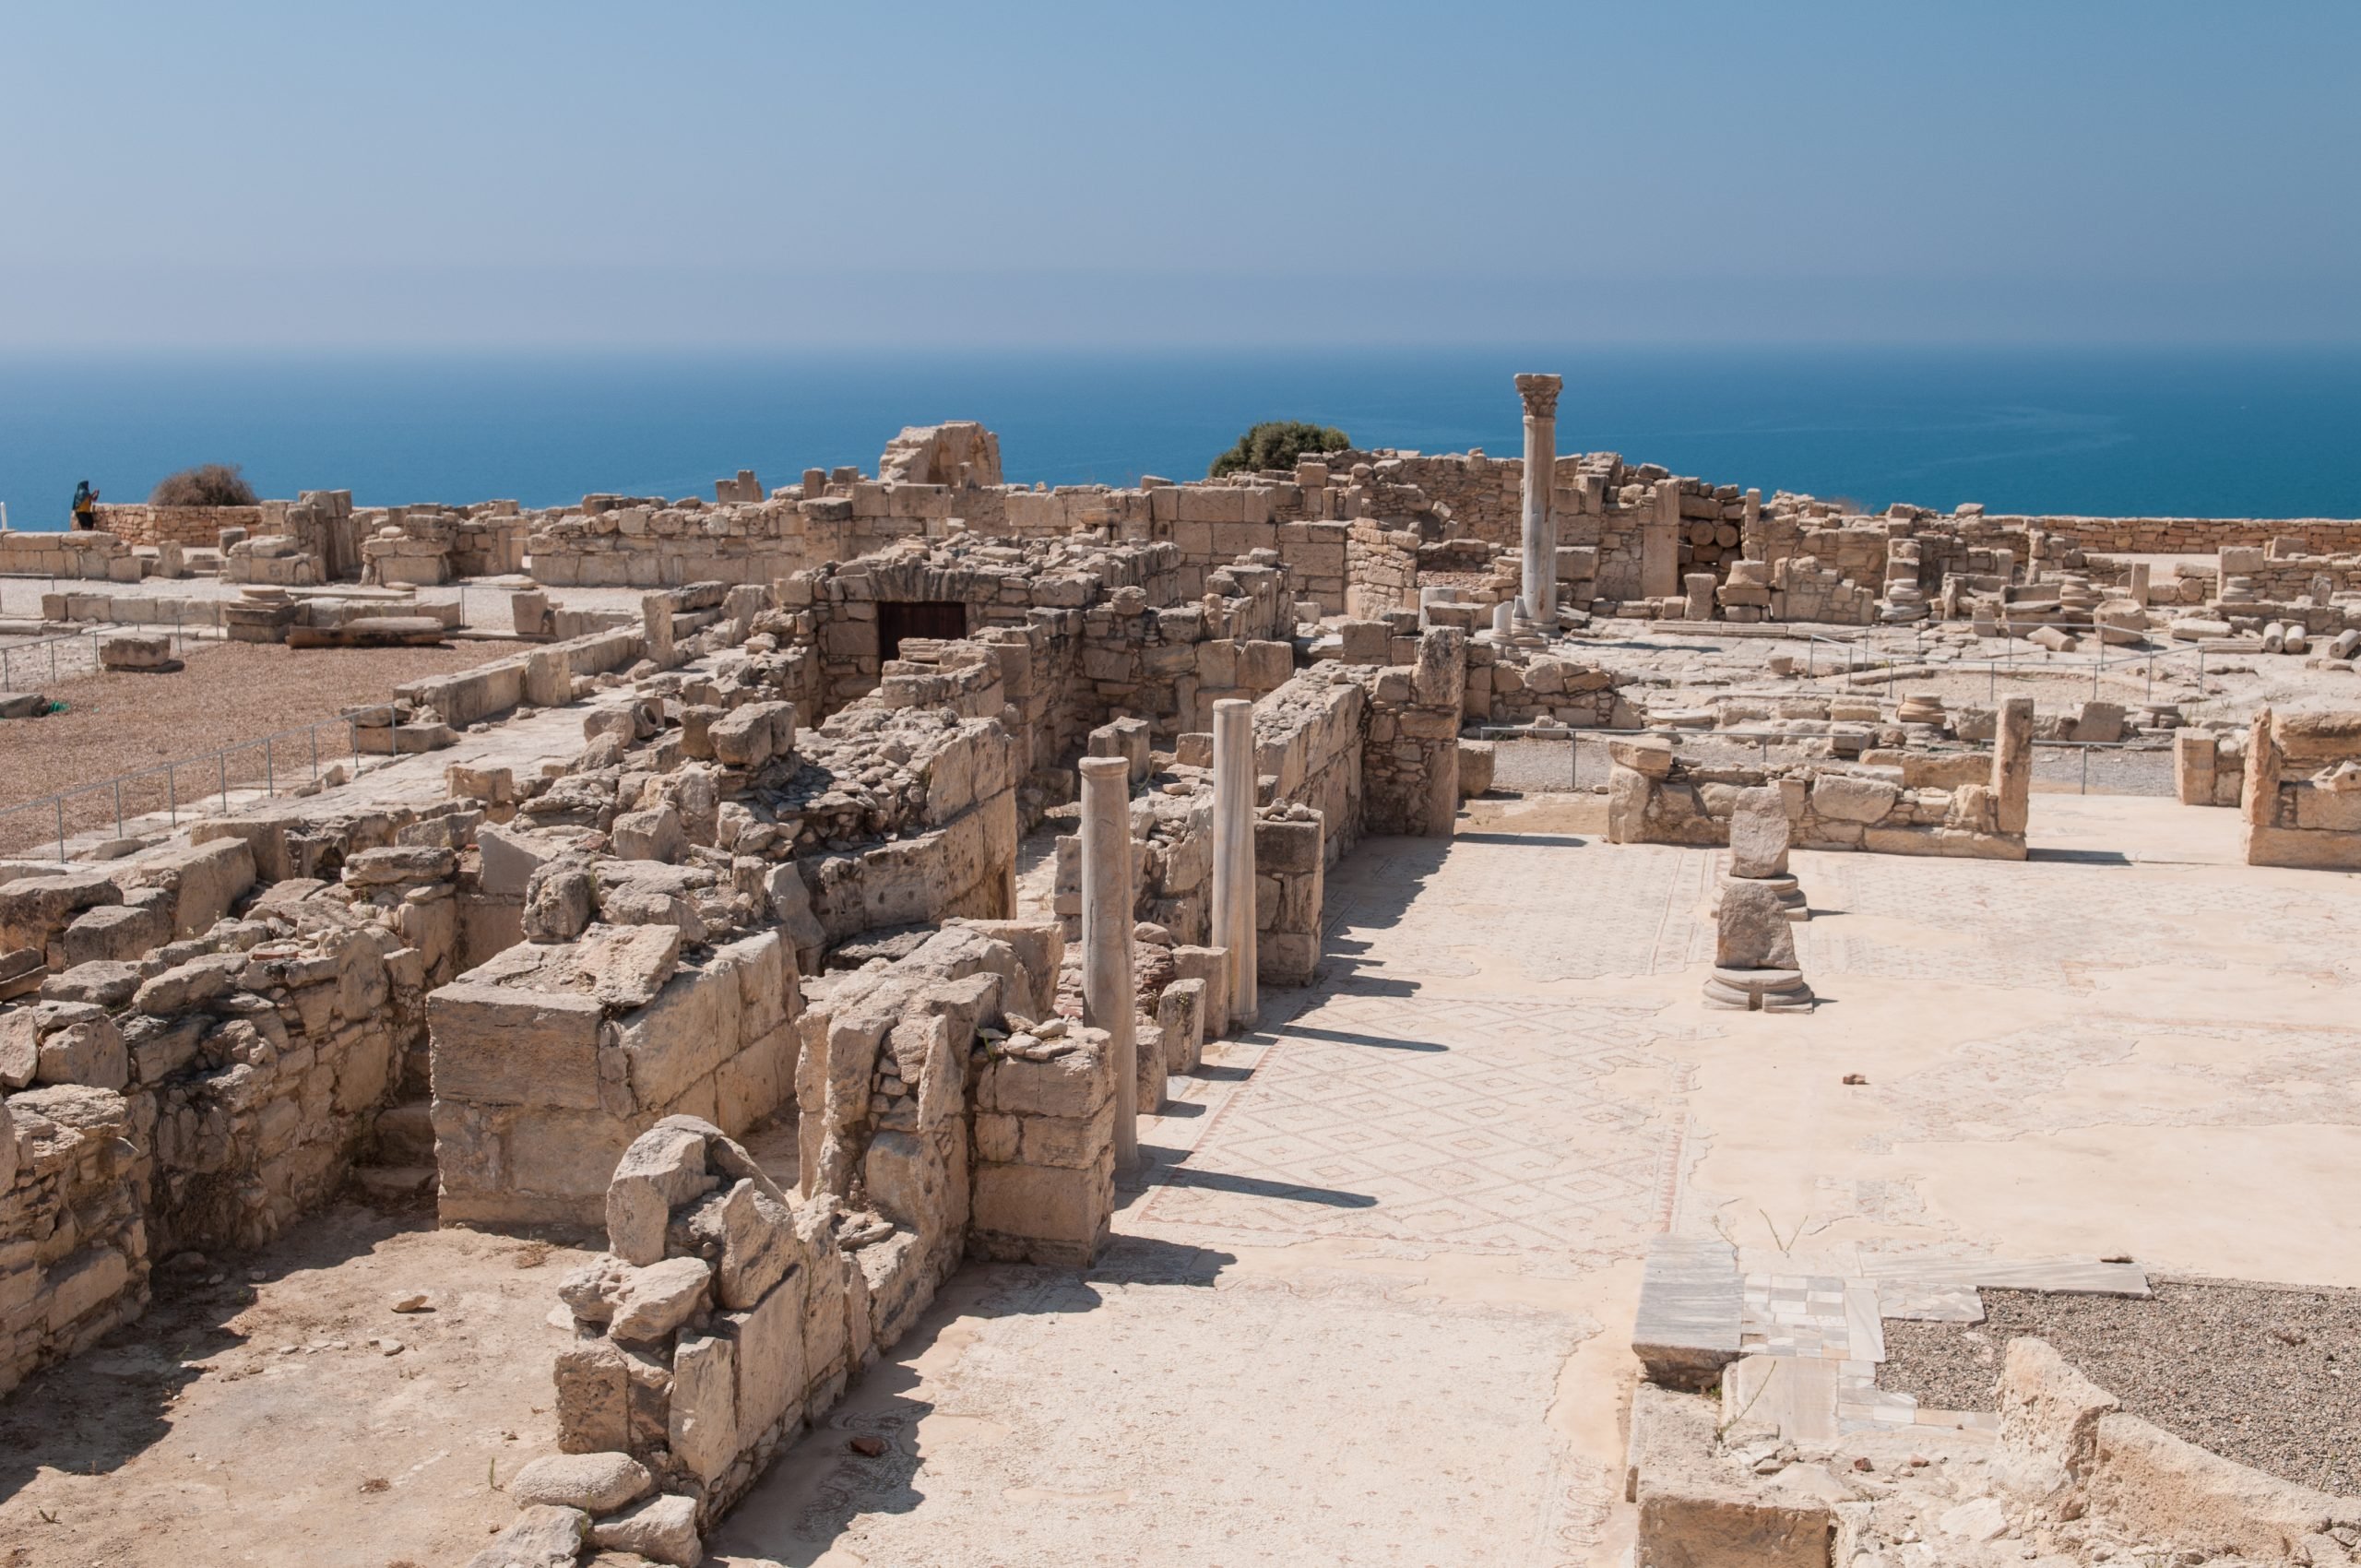 The Kourion Archeological Site, Most Instagrammable Places In Cyprus And Best Cyprus Instagram Spots